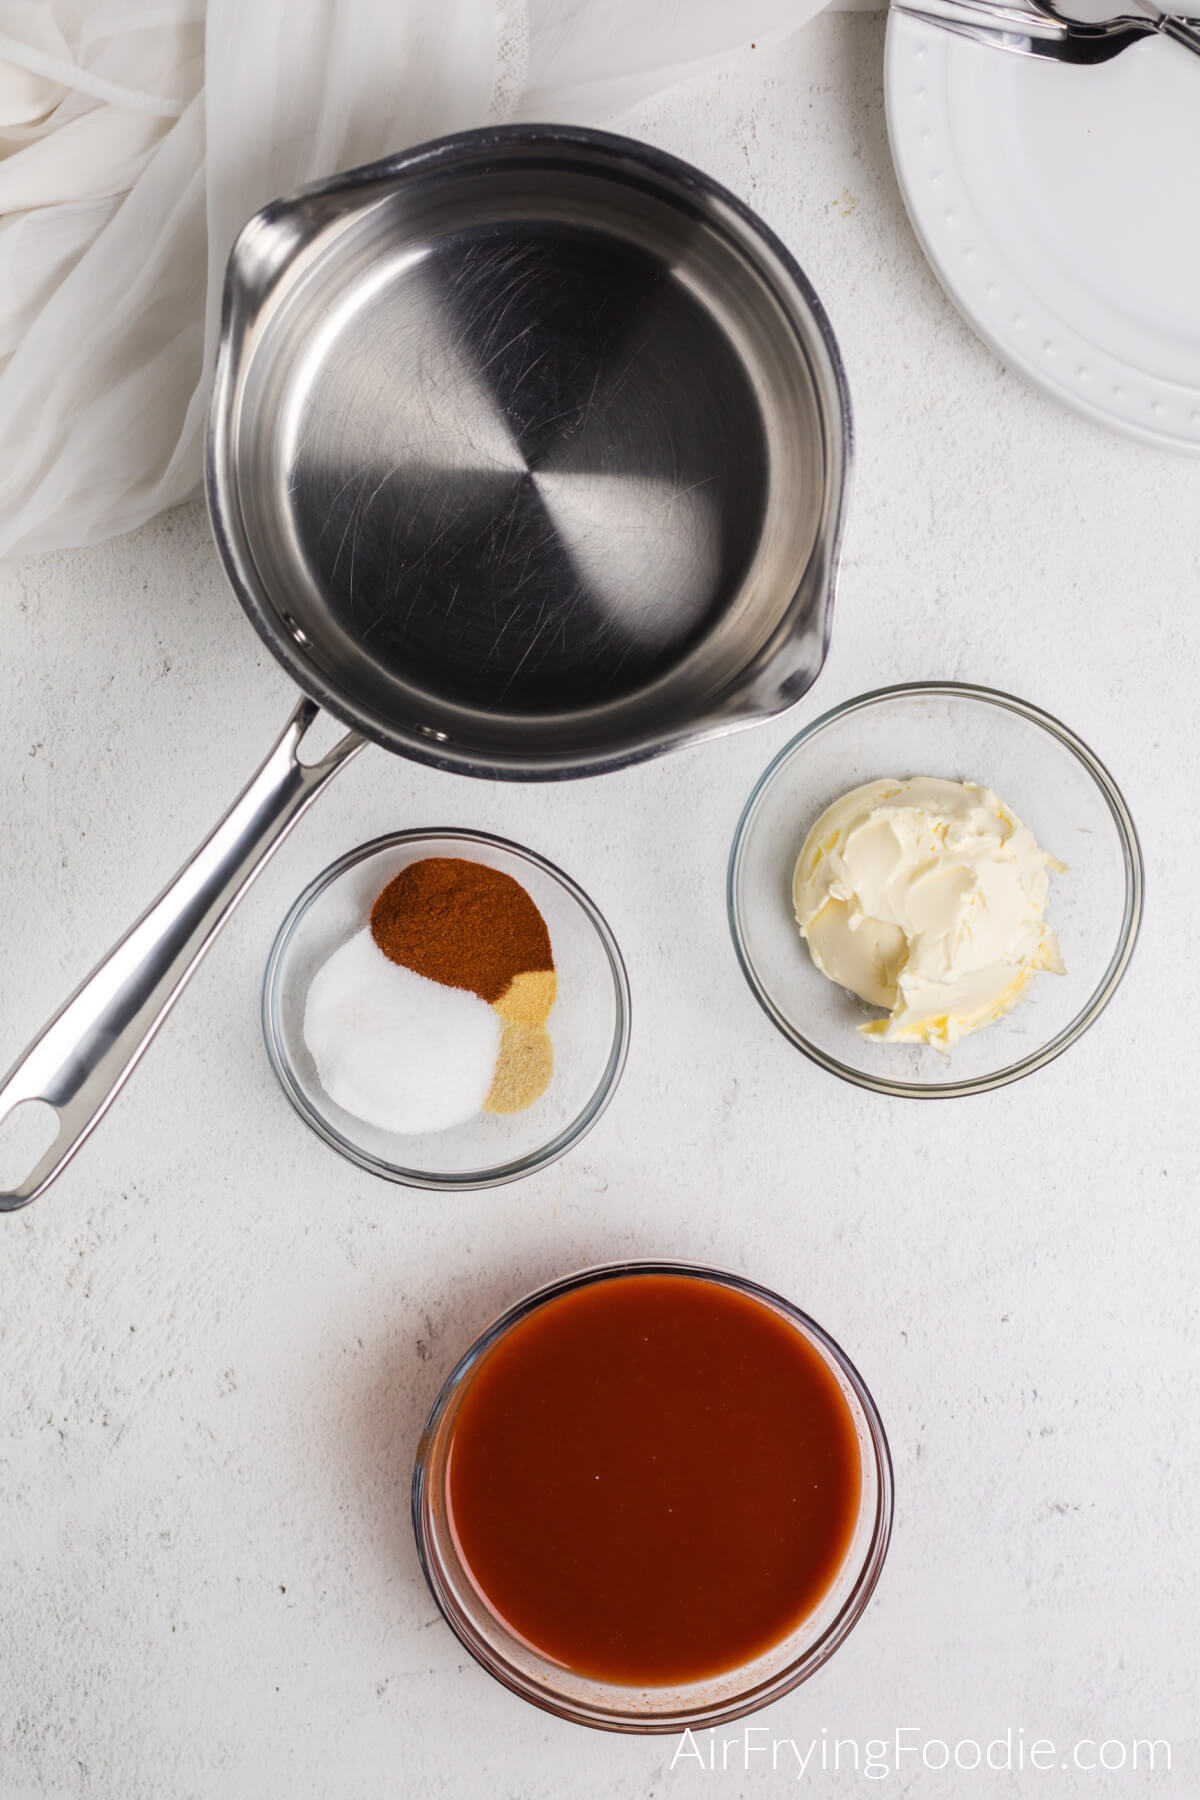 Ingredients needed to make the homemade wing sauce: sauce pan, hot sauce in a bowl, seasonings in a bowl, and margarine or butter in a bowl. 